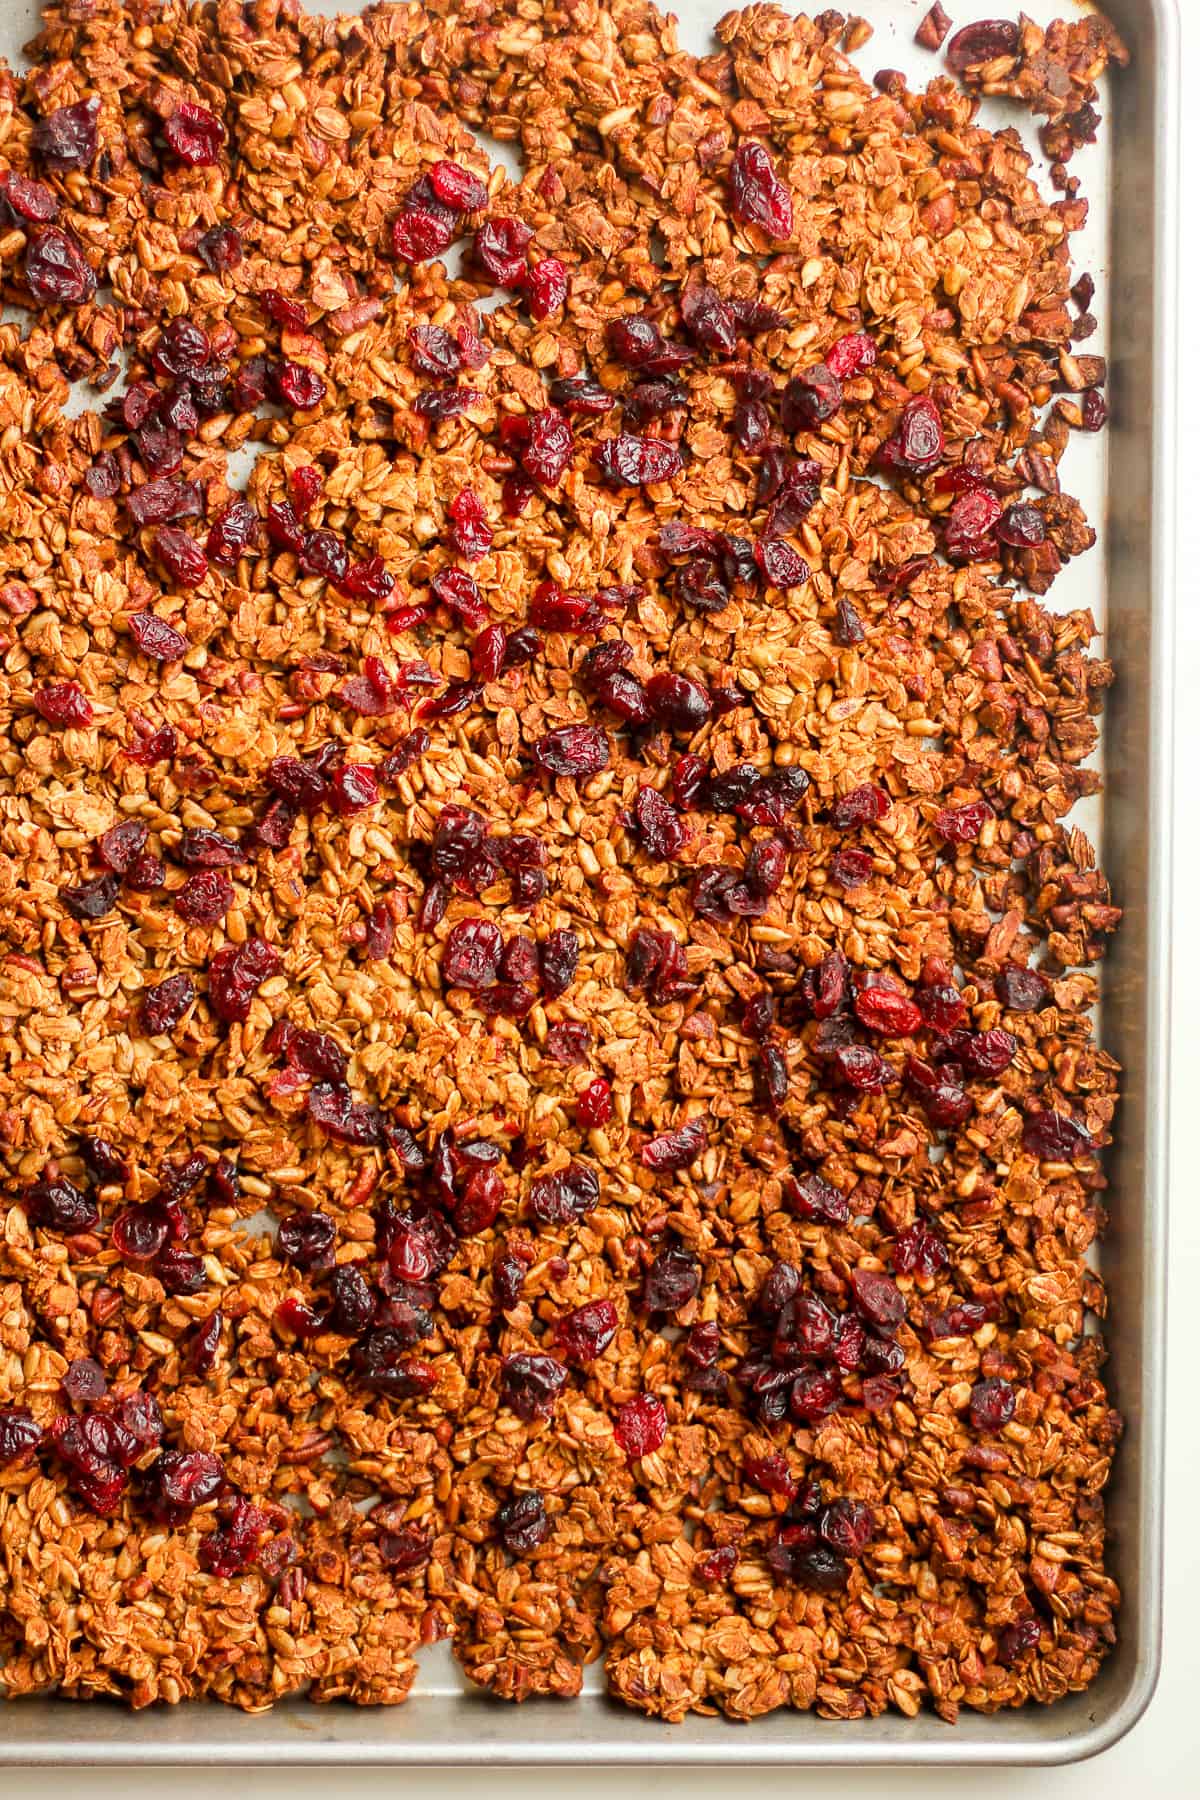 A baking sheet with the granola with raisins before breaking it up.